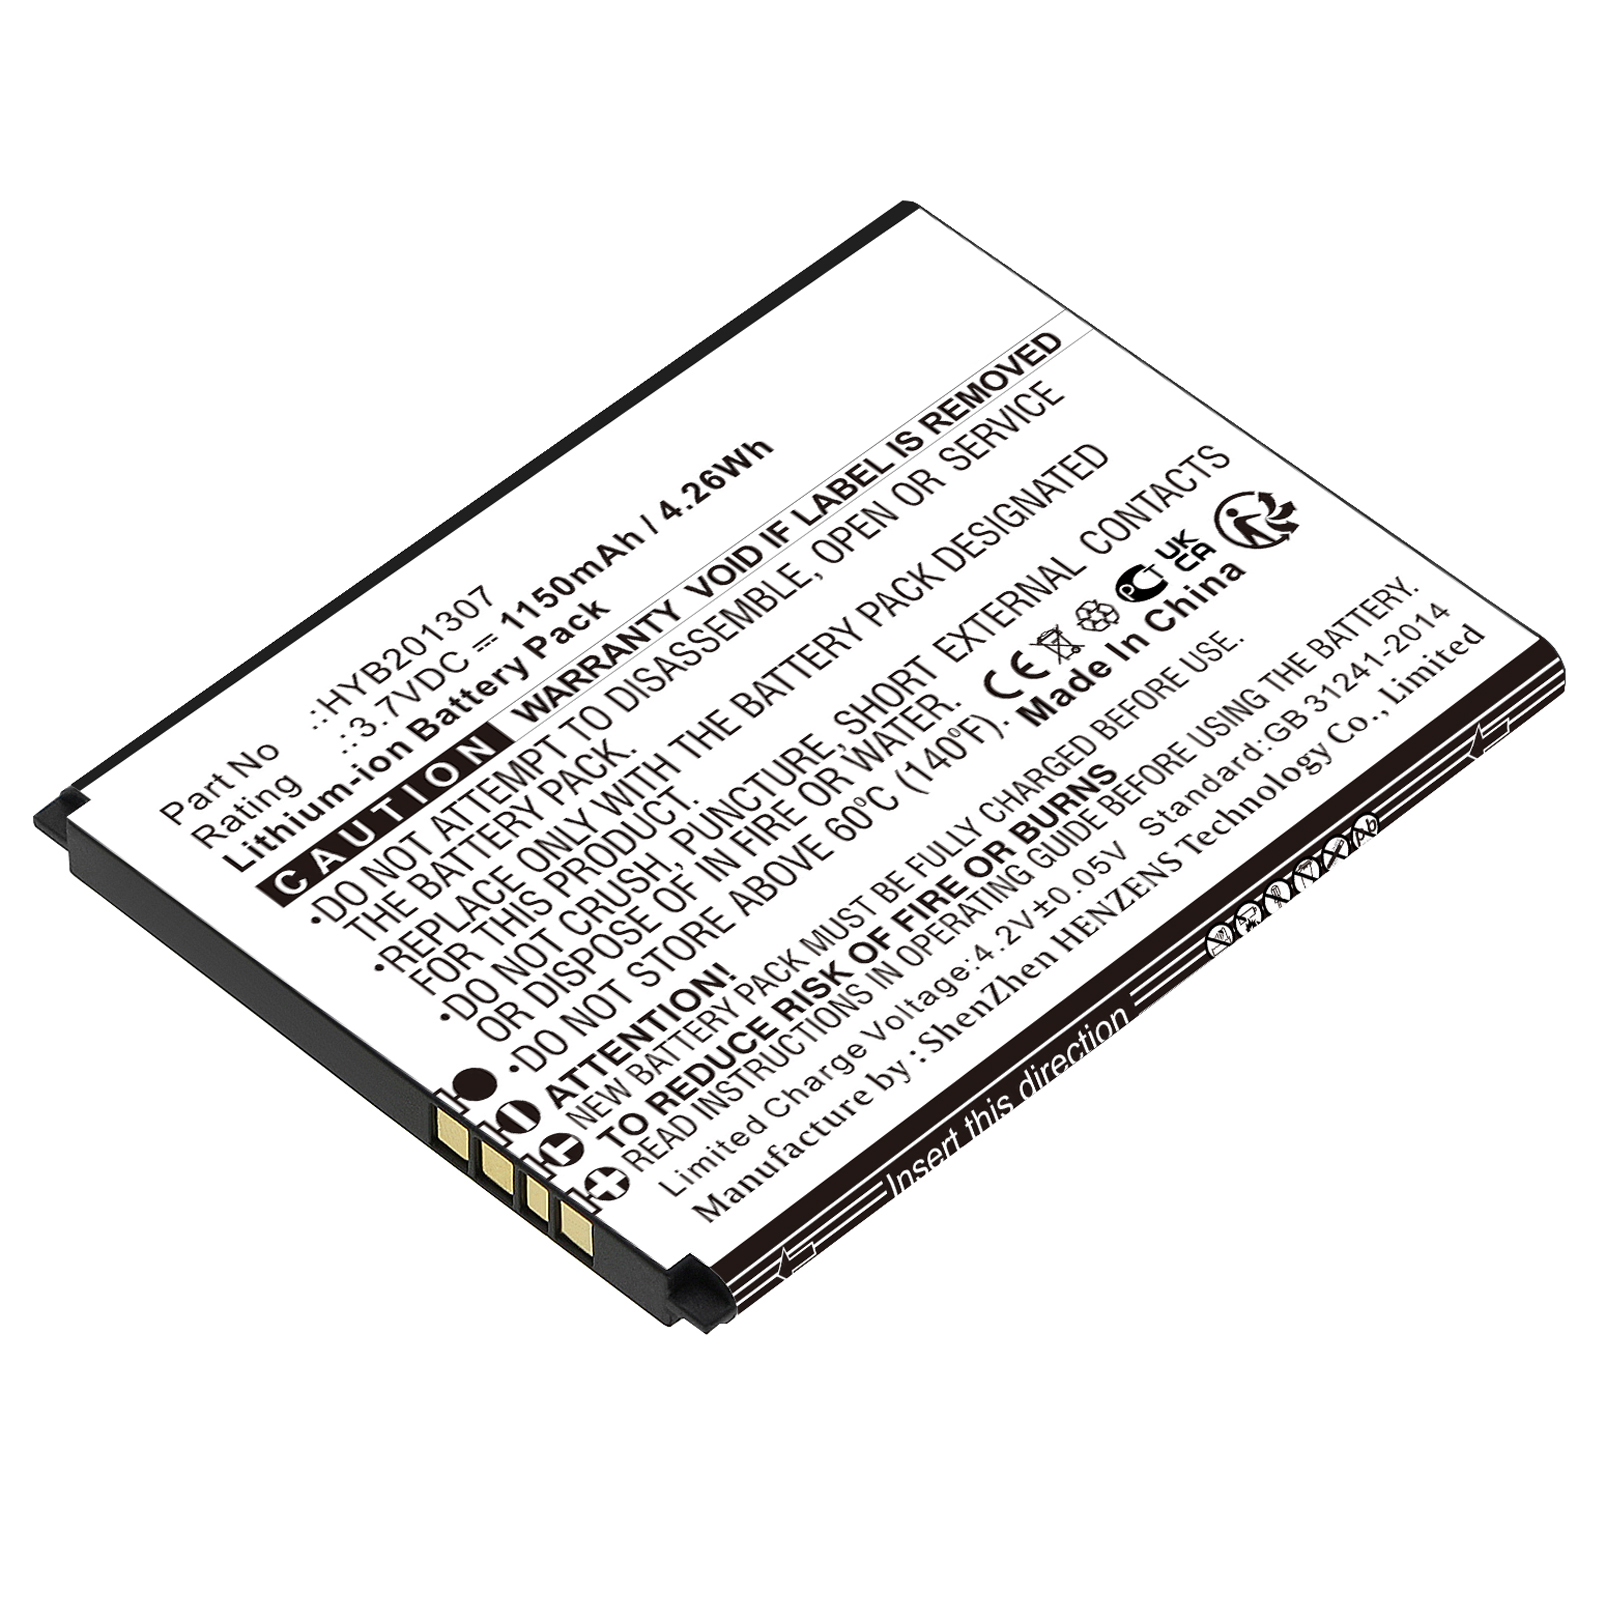 Synergy Digital Cell Phone Battery, Compatible with UMX HYB201307 Cell Phone Battery (Li-ion, 3.7V, 1150mAh)